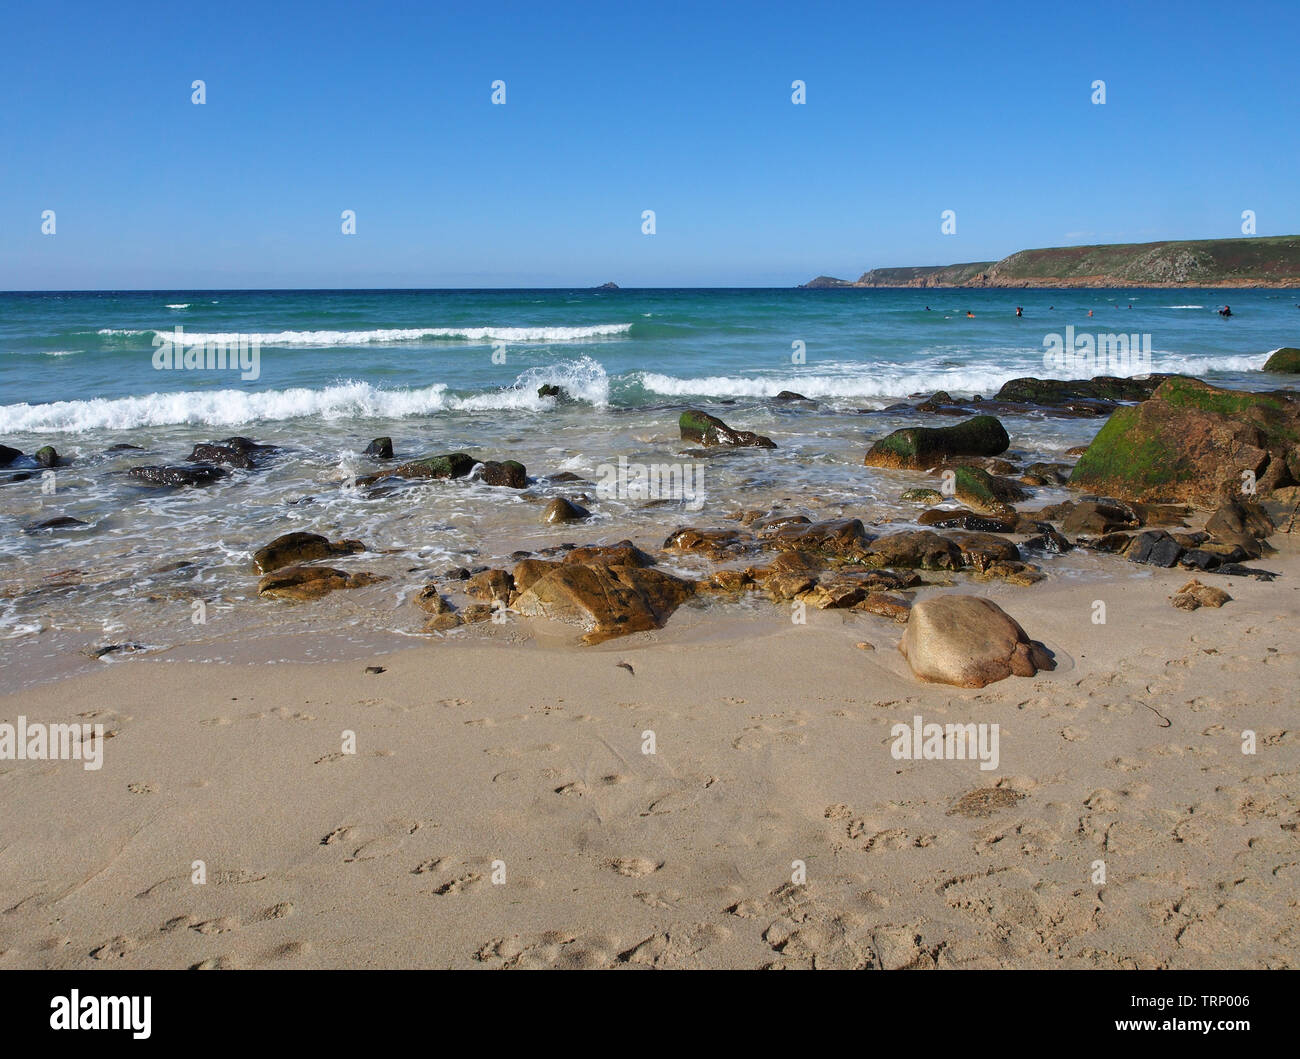 A sunny summers day on the beach in Sennen Cove, Cornwall, England, UK showing the sandy beach and blue sea under a blue sky. Stock Photo